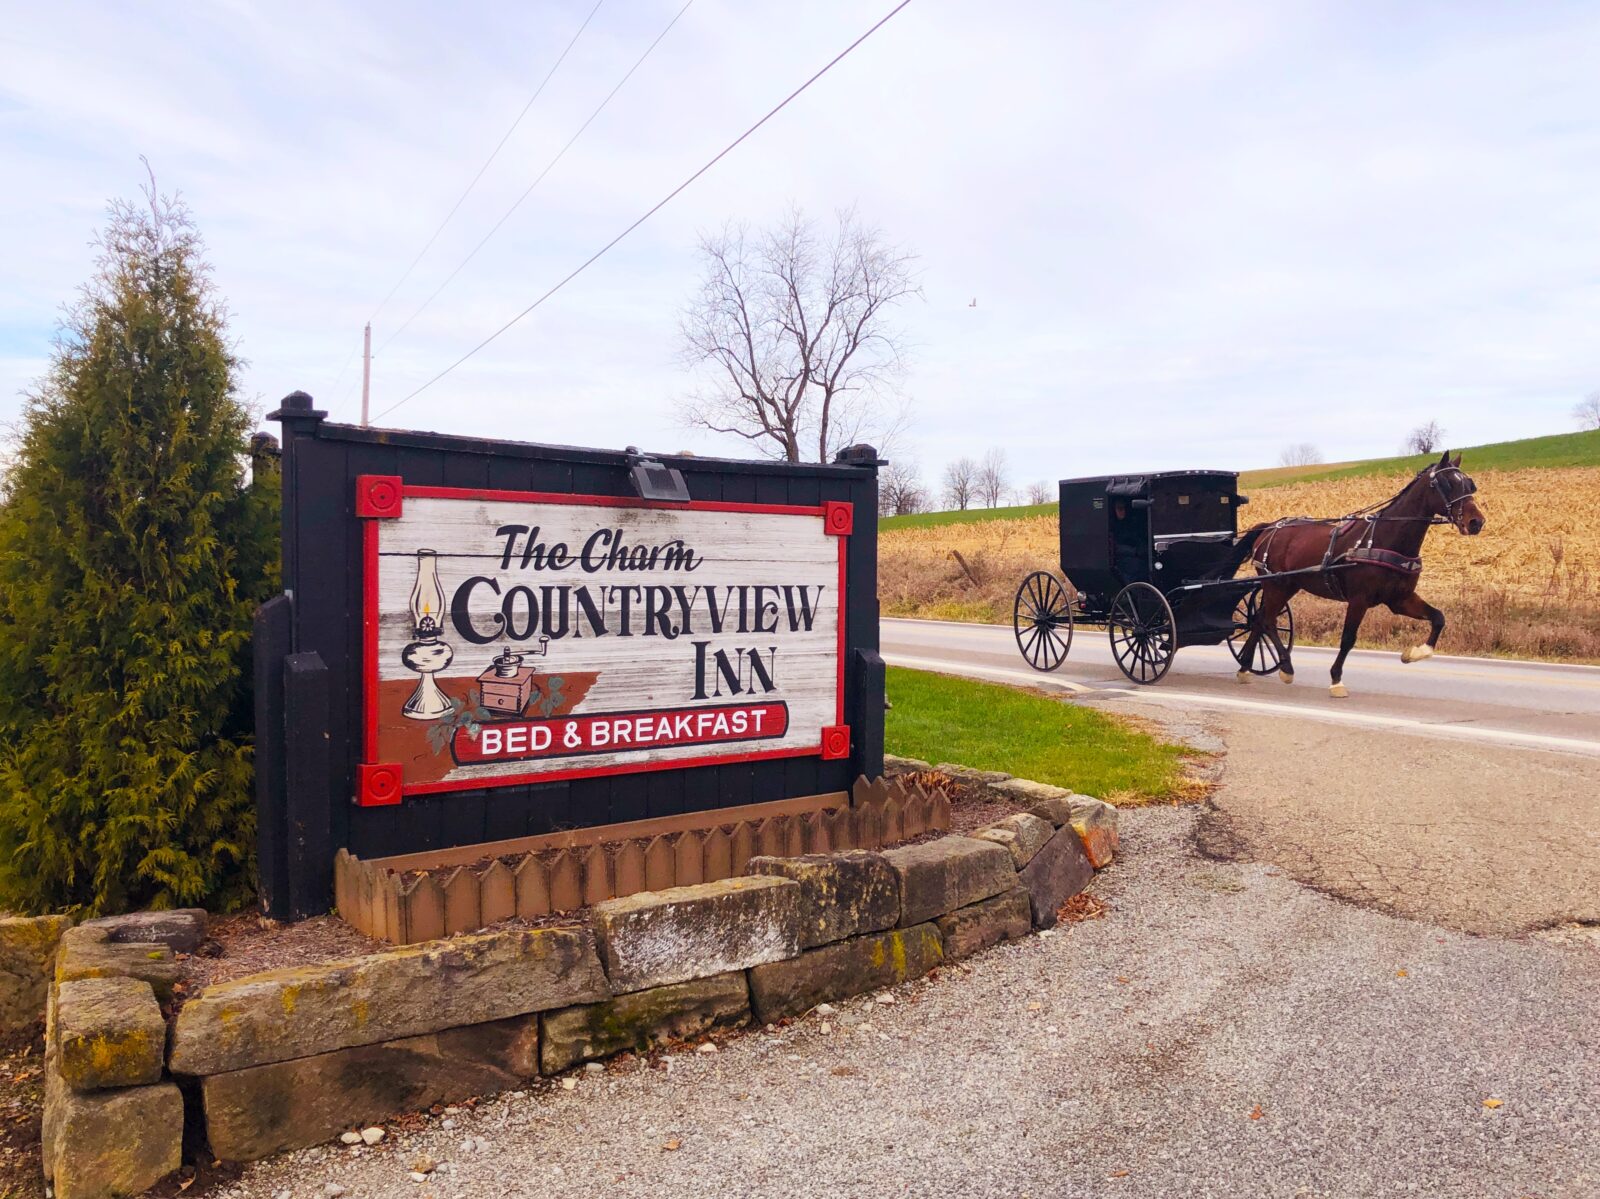 The Charm Countryview Inn Bed & Breakfast Amish Country